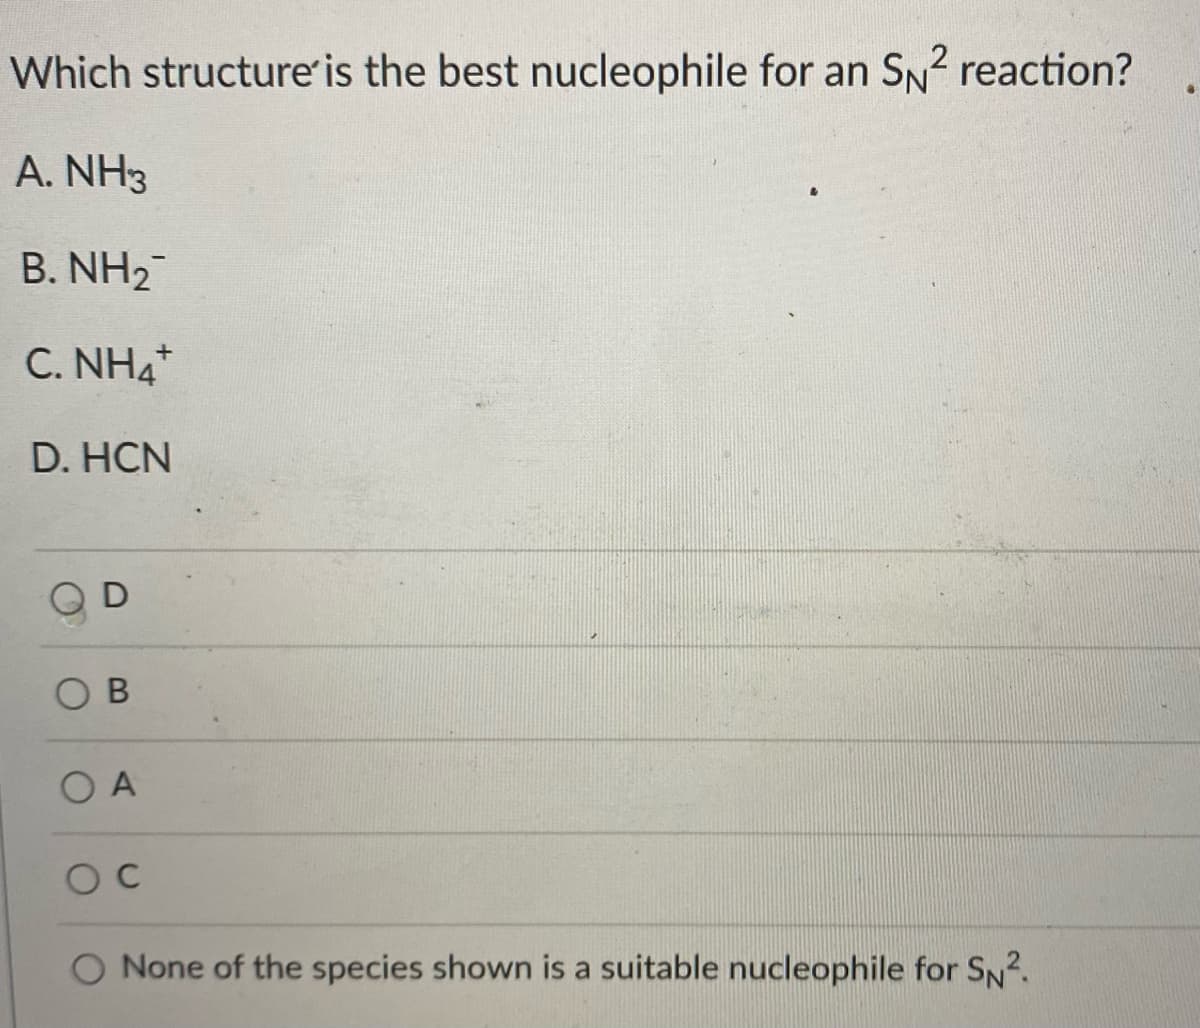 Which structure is the best nucleophile for an SN2 reaction?
A. NH3
B. NH2
C. NH4*
D. HCN
O B
O A
O C
None of the species shown is a suitable nucleophile for SN2.
